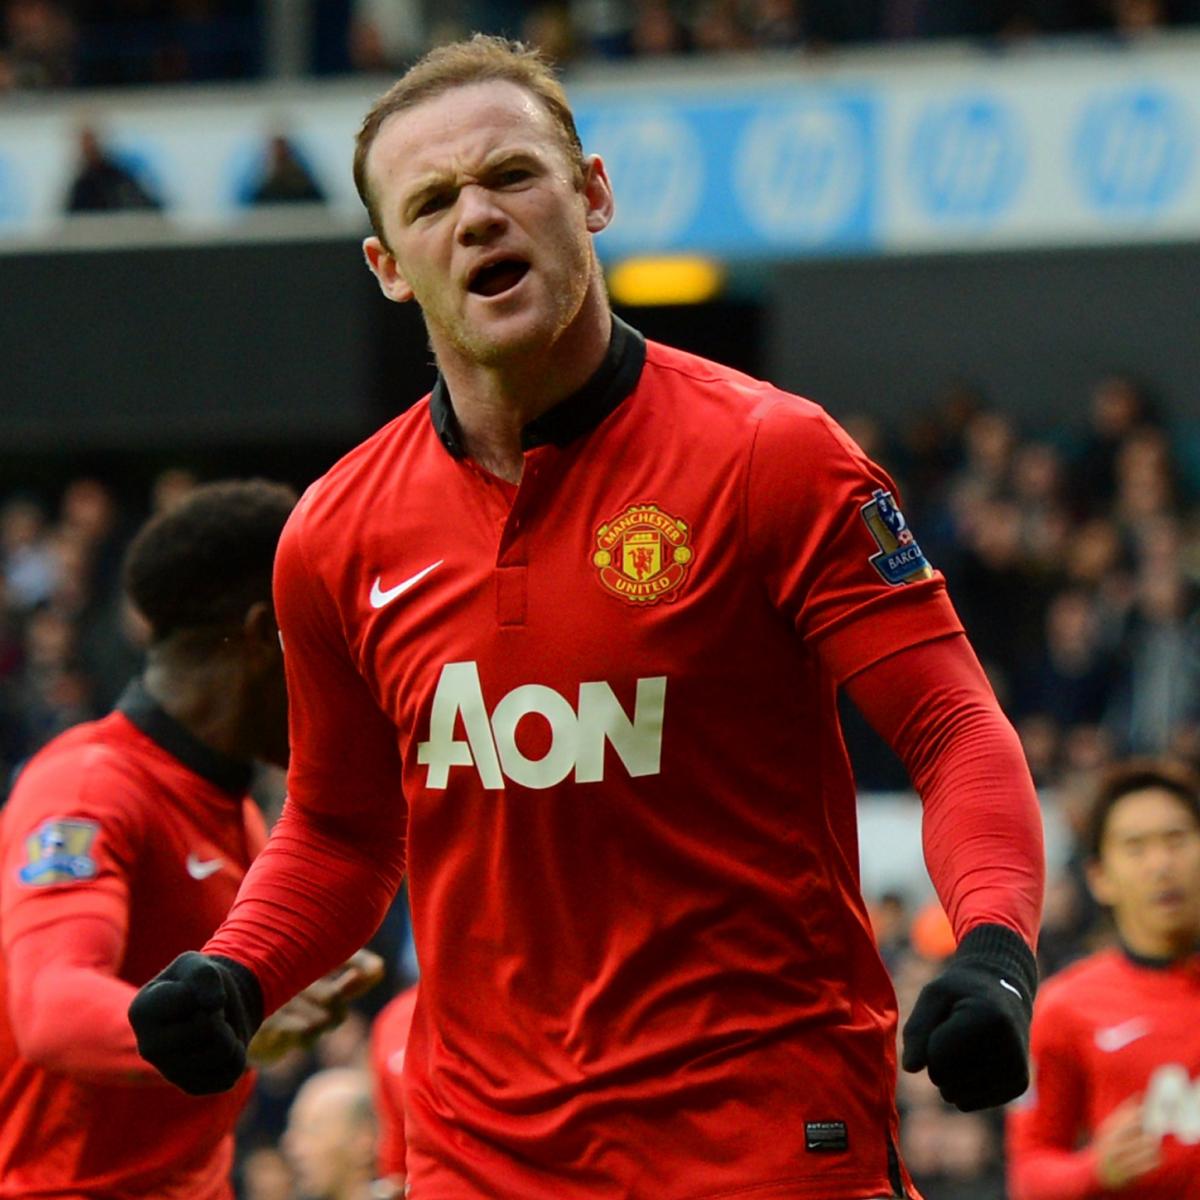 Wayne Rooney Yellow Card: How Manchester United Will Fare in Star's